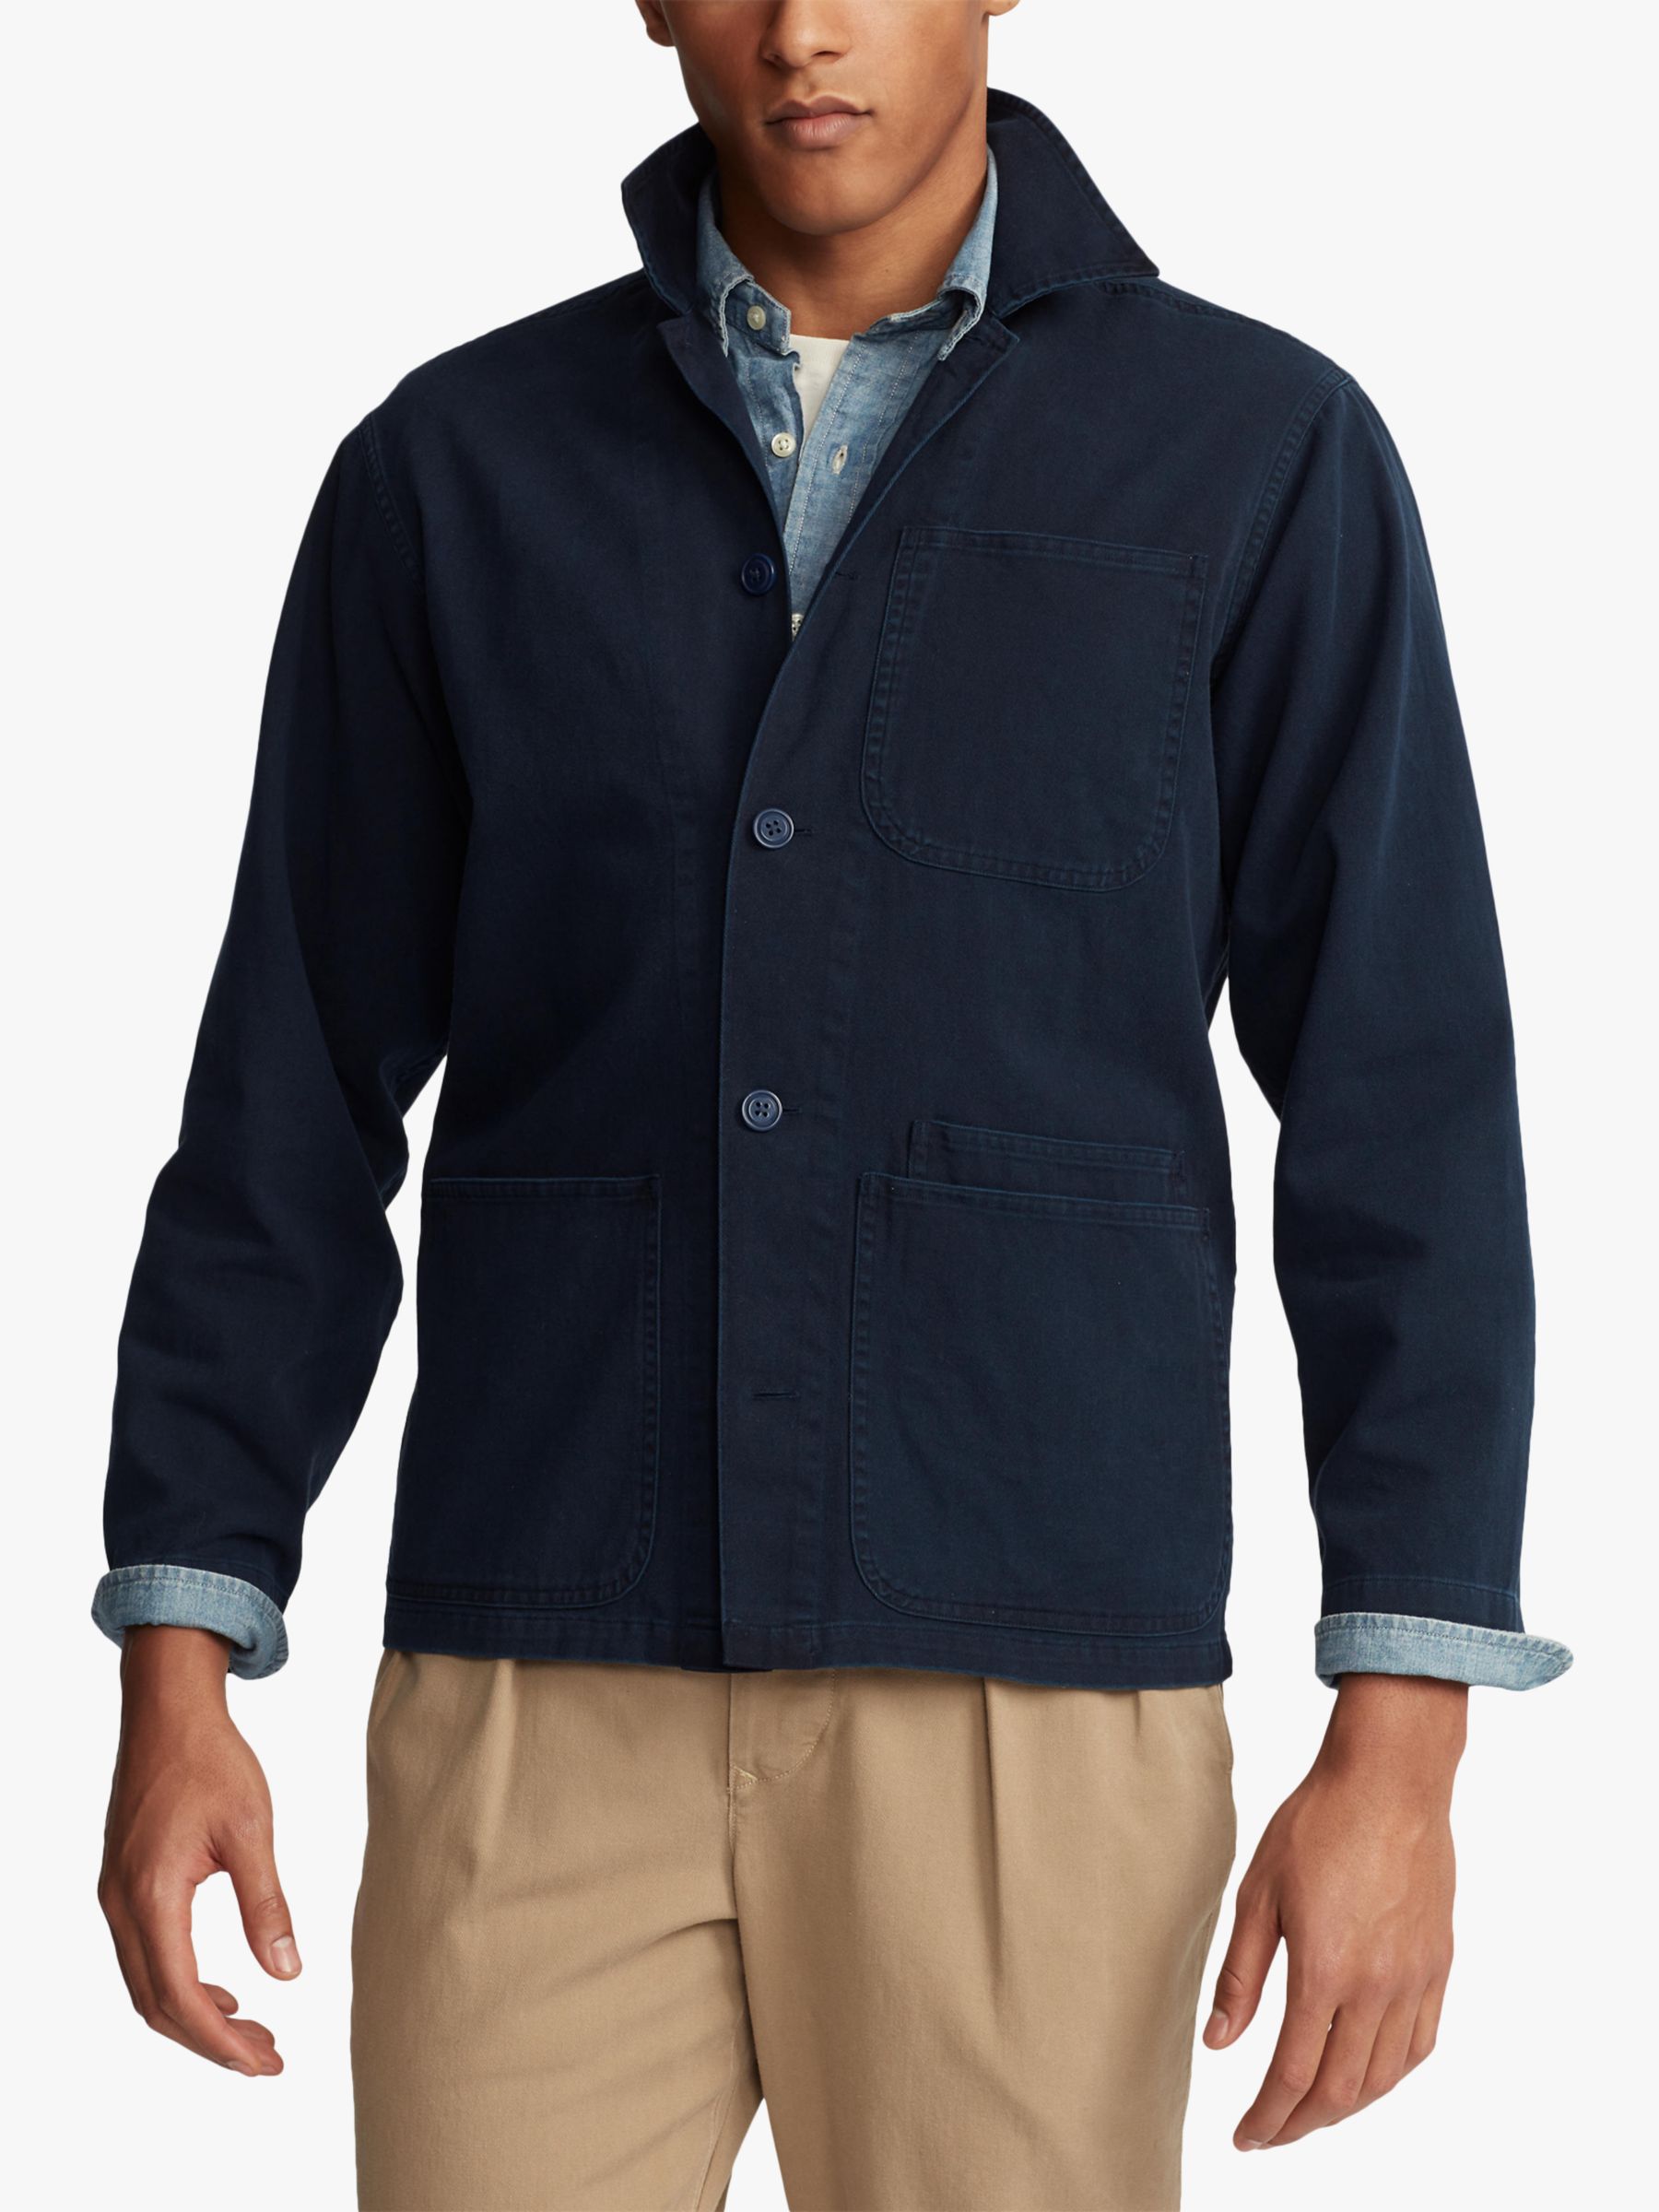 Polo Ralph Lauren Twill Overshirt, Collection Navy at John Lewis & Partners